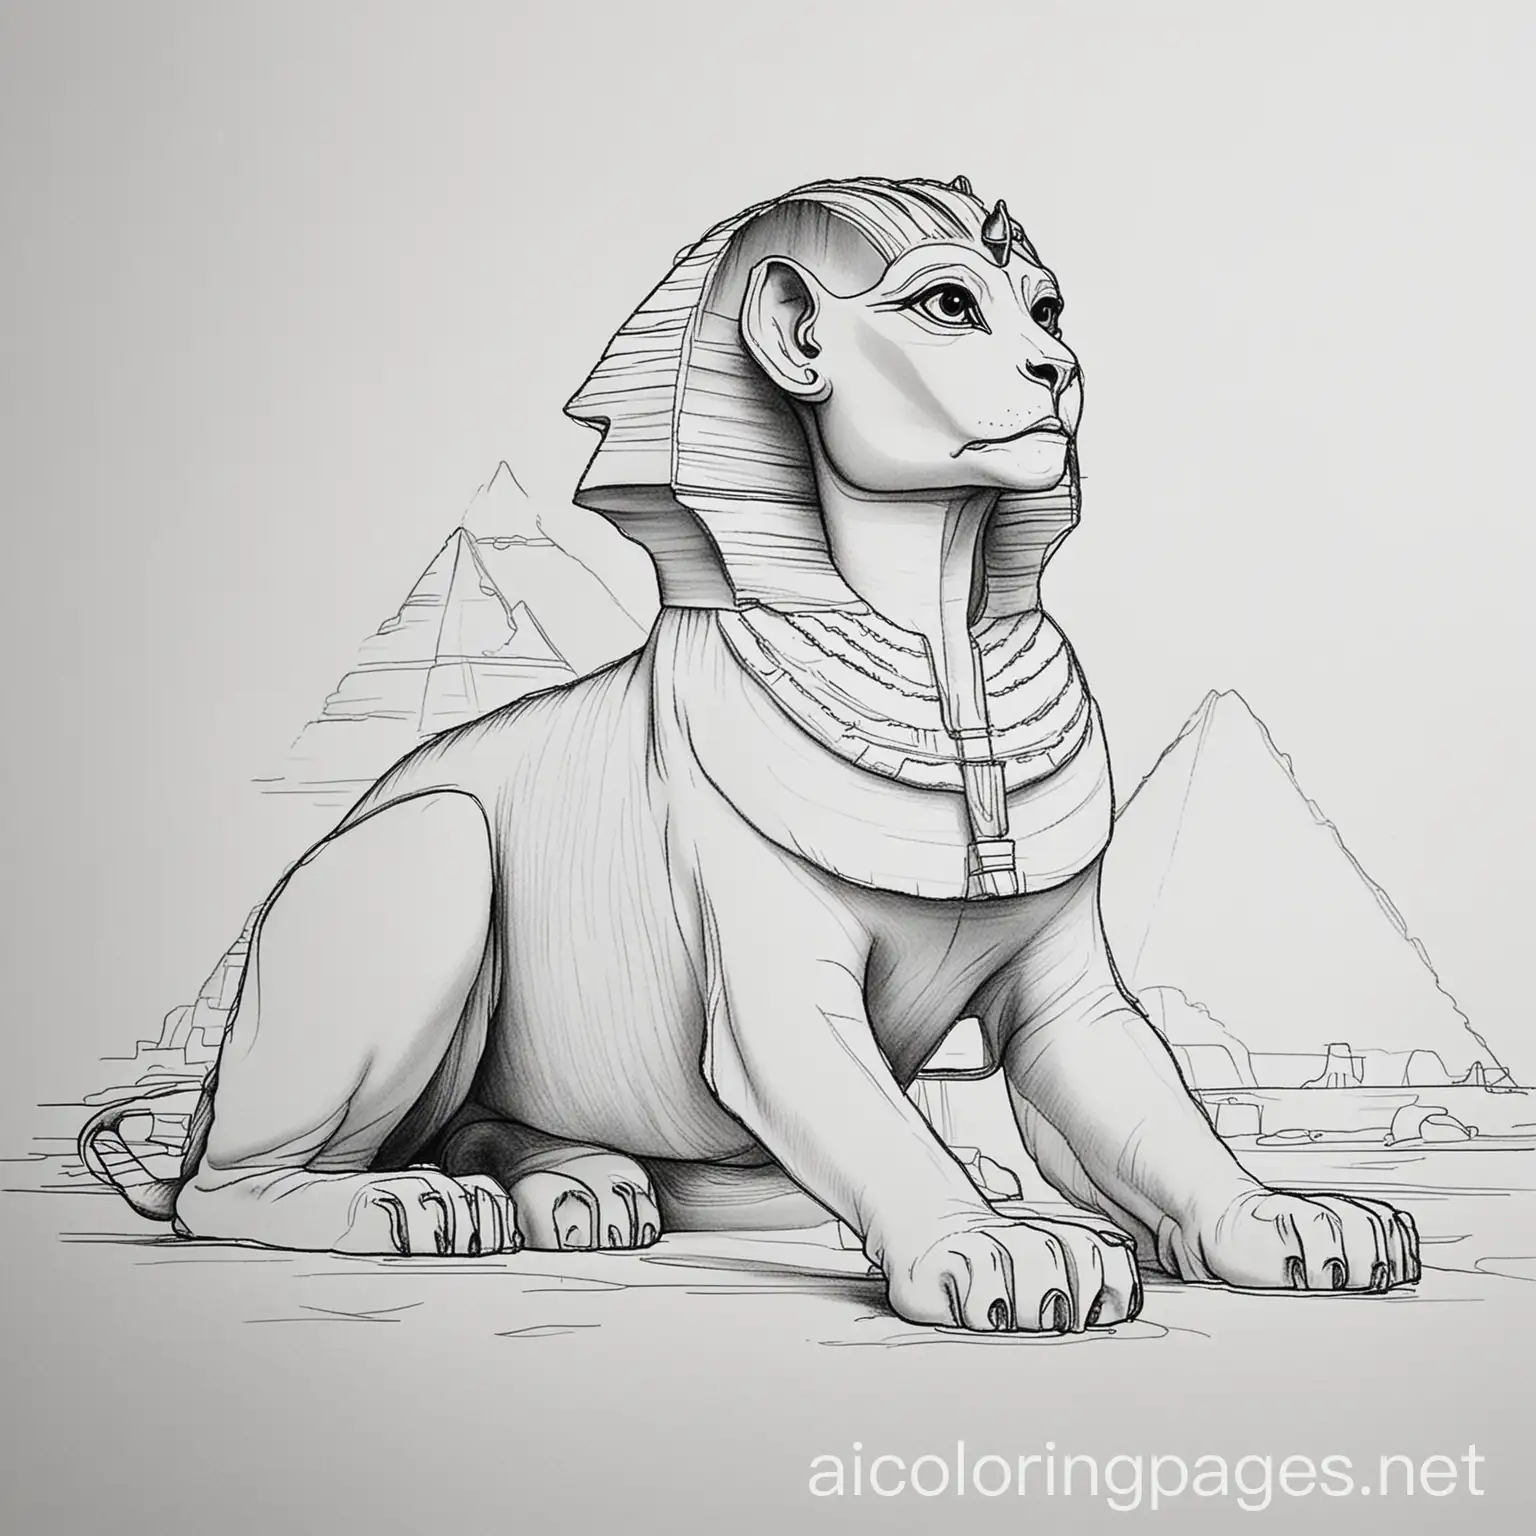 androsphinx, Coloring Page, black and white, line art, white background, Simplicity, Ample White Space. The background of the coloring page is plain white to make it easy for young children to color within the lines. The outlines of all the subjects are easy to distinguish, making it simple for kids to color without too much difficulty. location near pyramids , Coloring Page, black and white, line art, white background, Simplicity, Ample White Space. The background of the coloring page is plain white to make it easy for young children to color within the lines. The outlines of all the subjects are easy to distinguish, making it simple for kids to color without too much difficulty